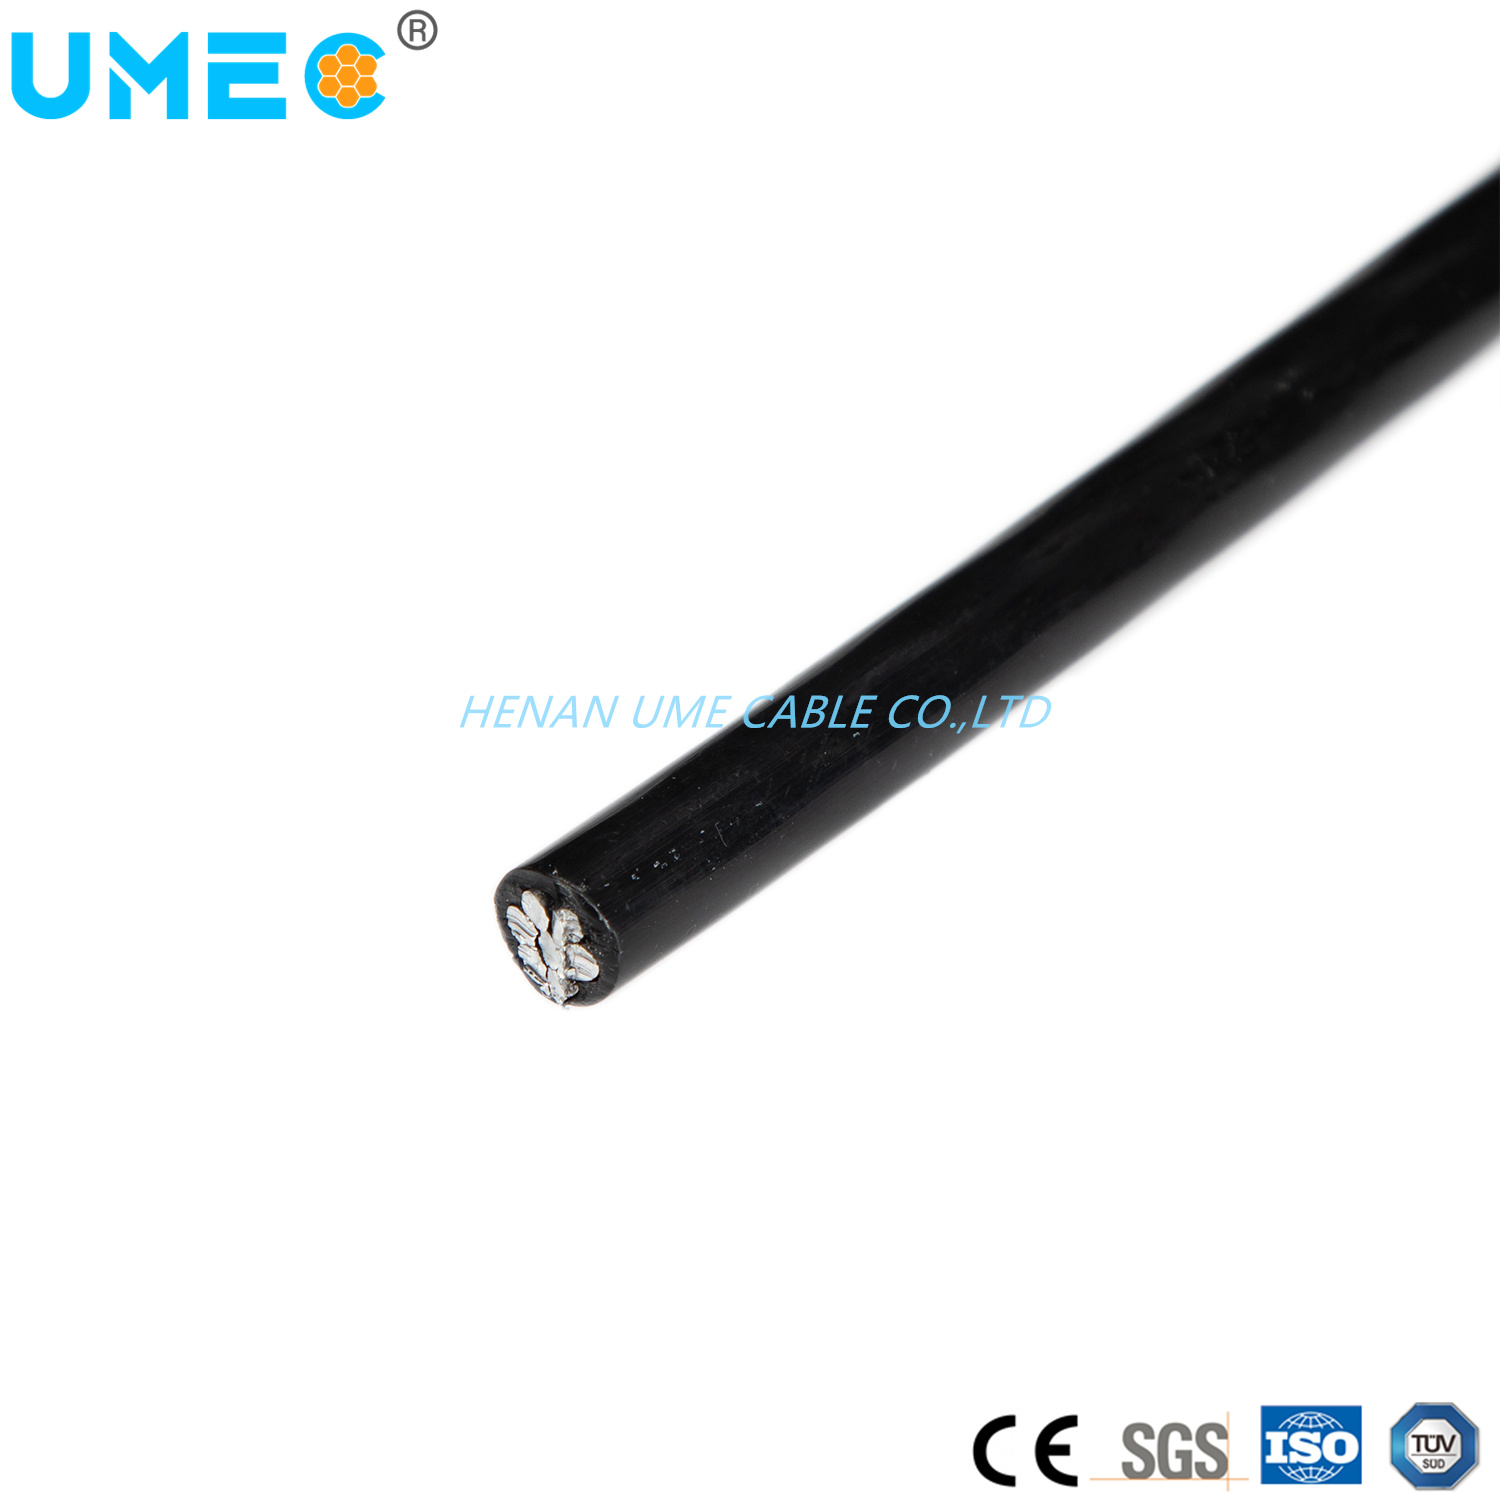 Underground Distribution Cable-Single Conductor Ud Cable